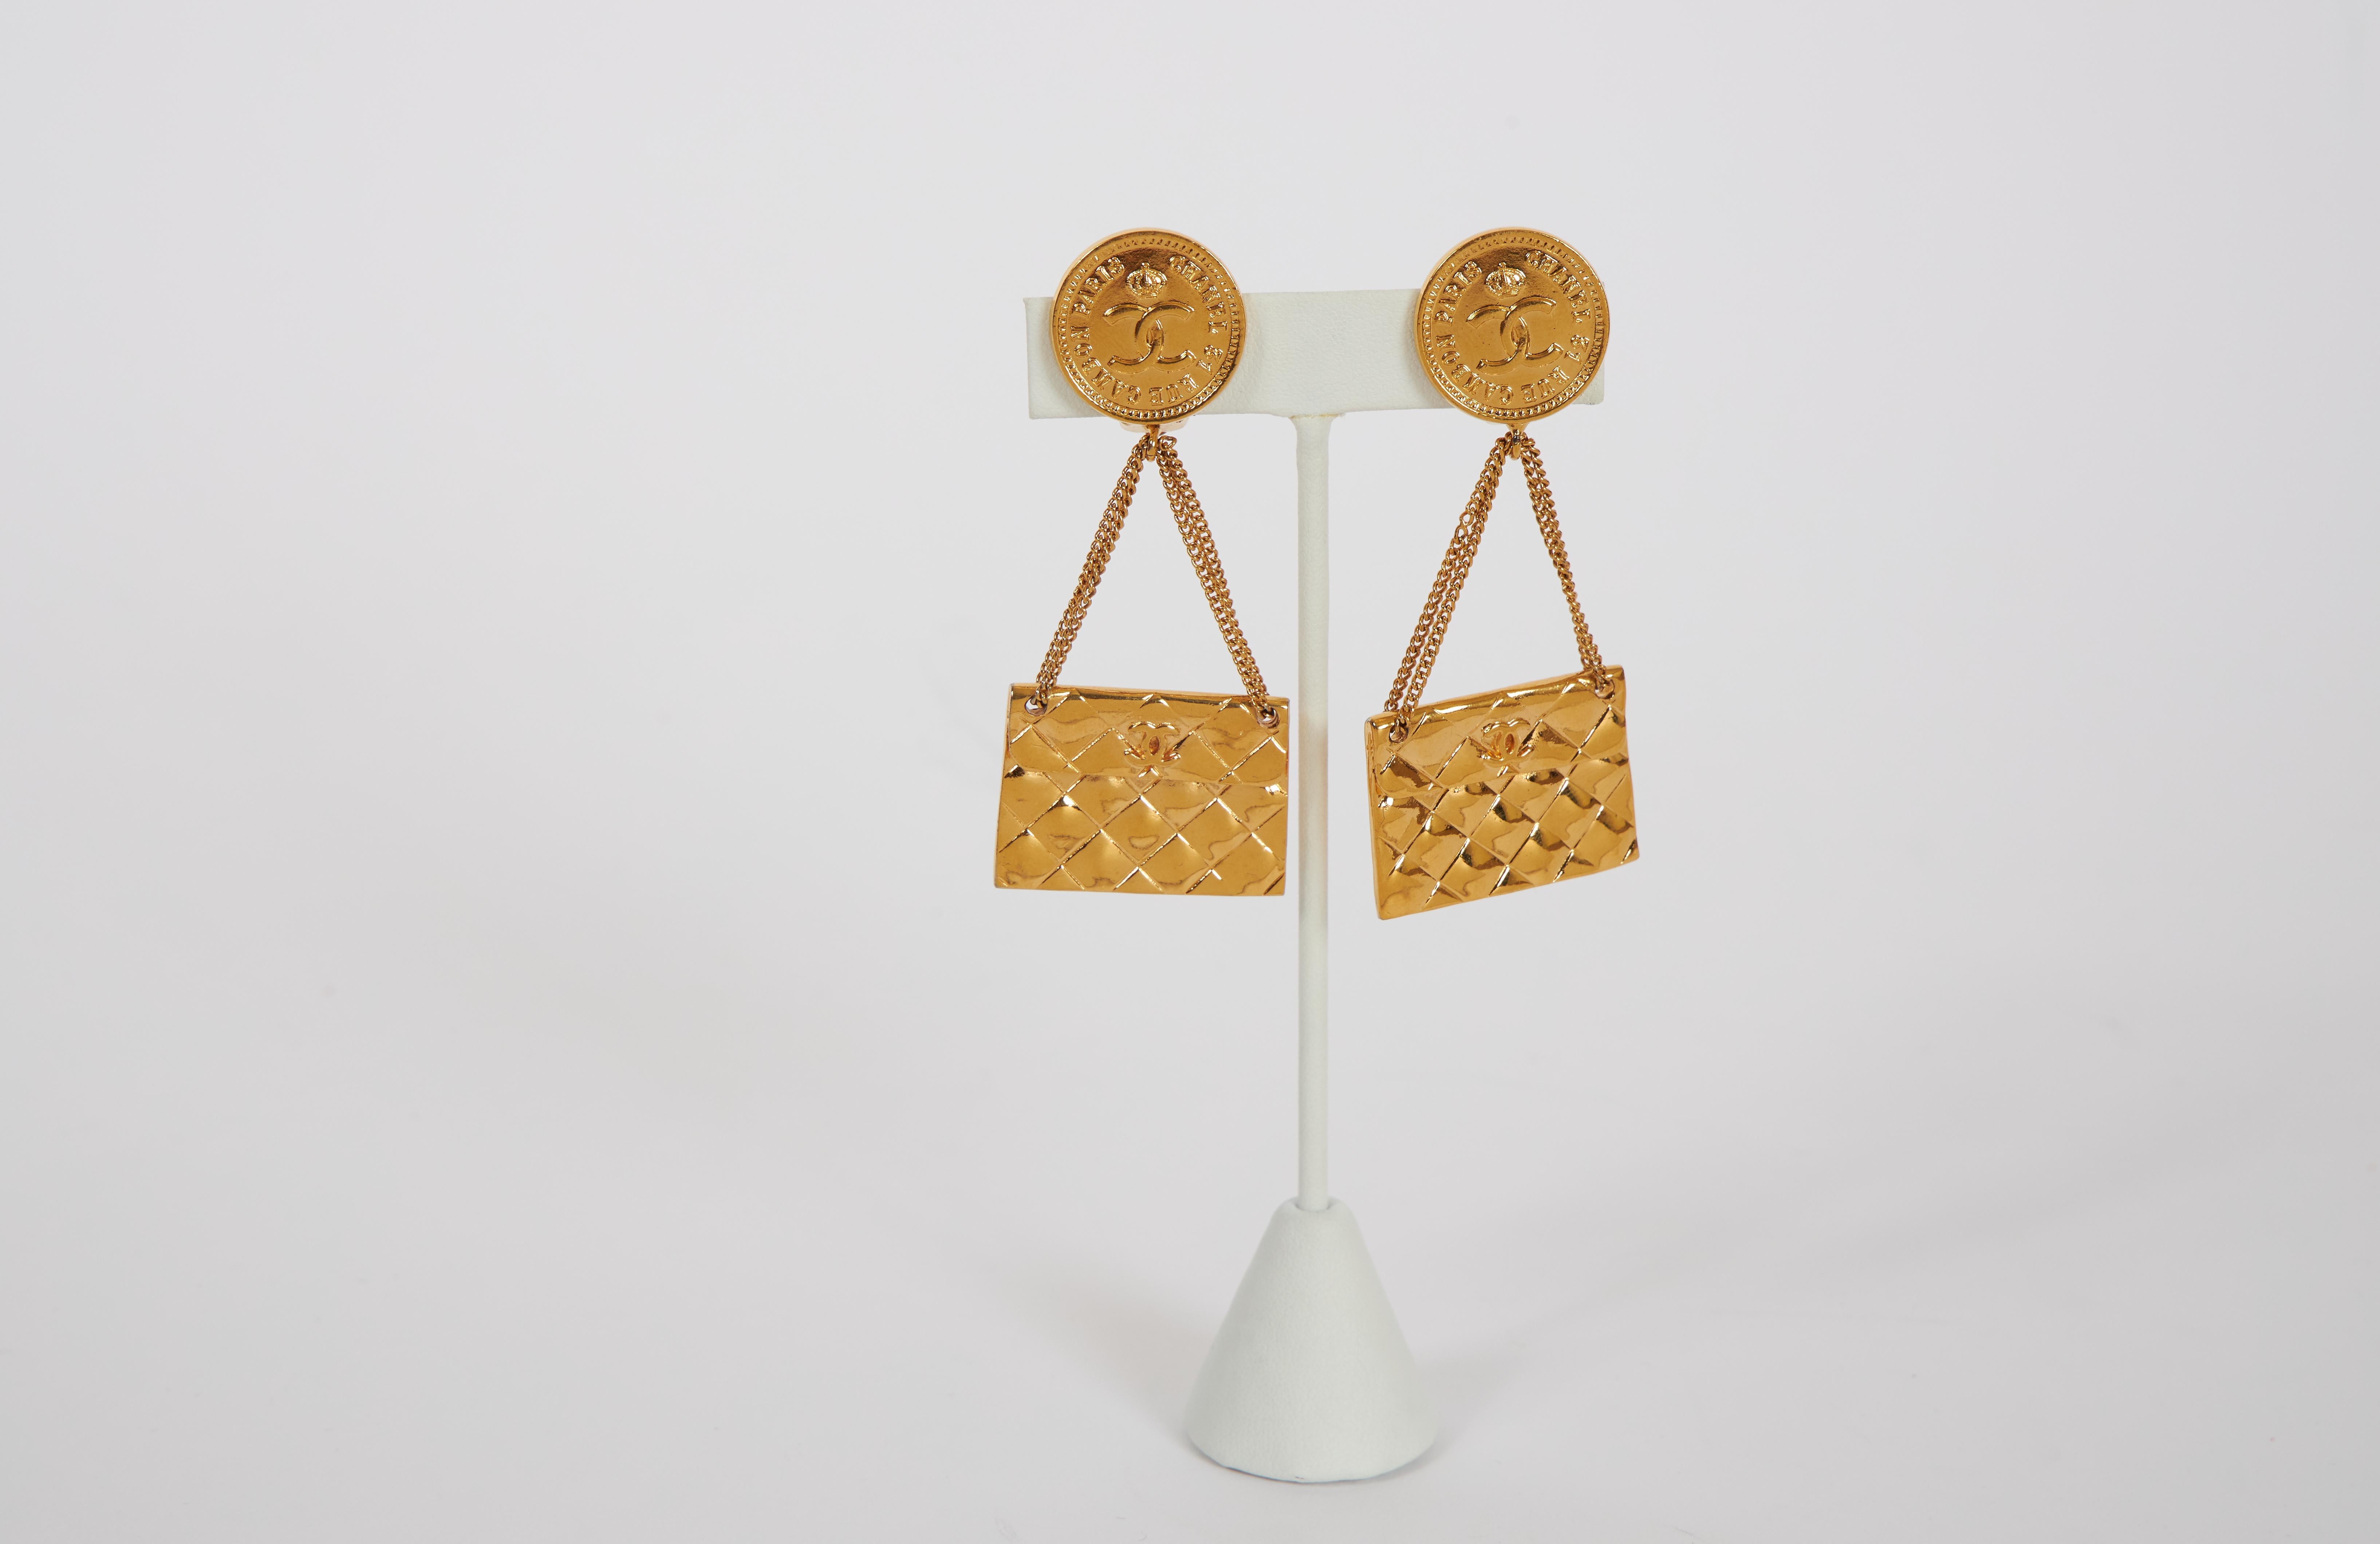 1970s Chanel goldtone metal earrings with drops inspired by the brand's iconic flap bag. Clip backs. Original box included.